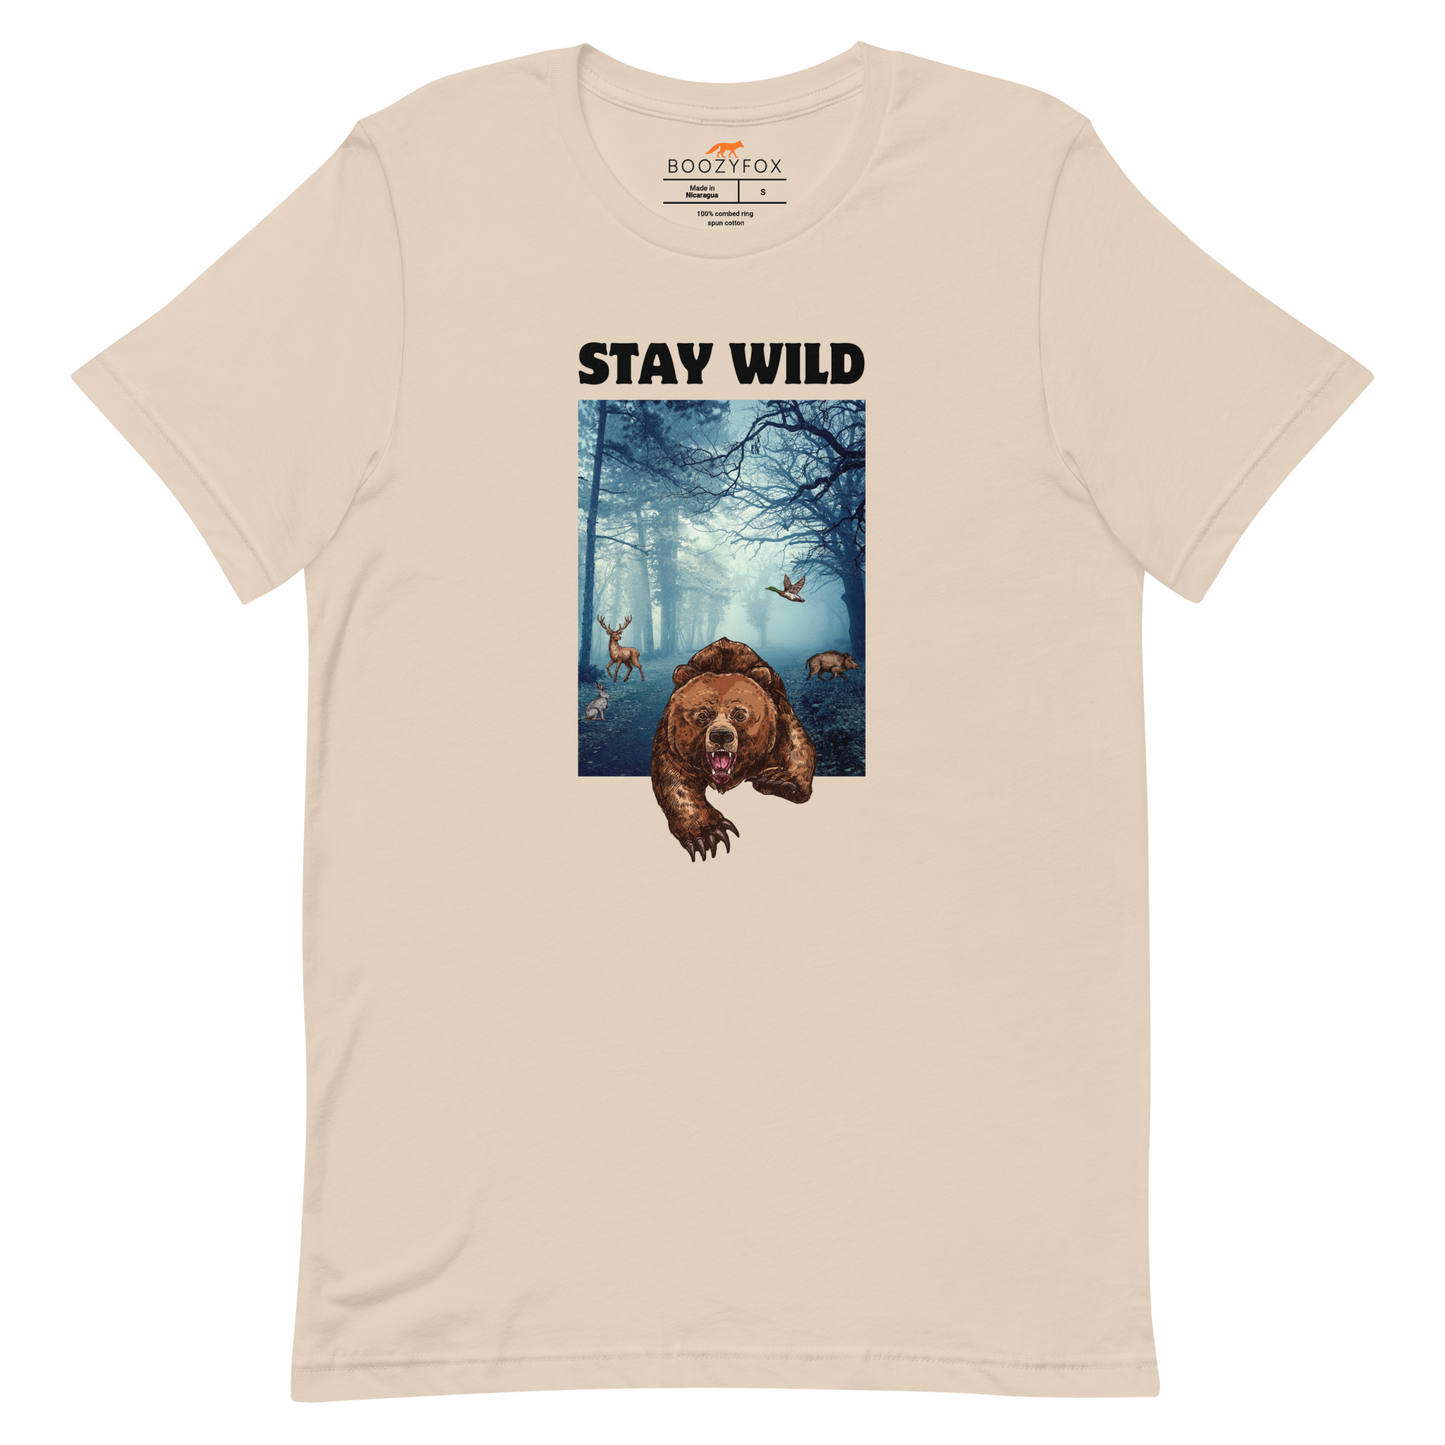 Soft Cream Premium Bear Tee featuring a Stay Wild graphic on the chest - Cool Graphic Bear Tees - Boozy Fox